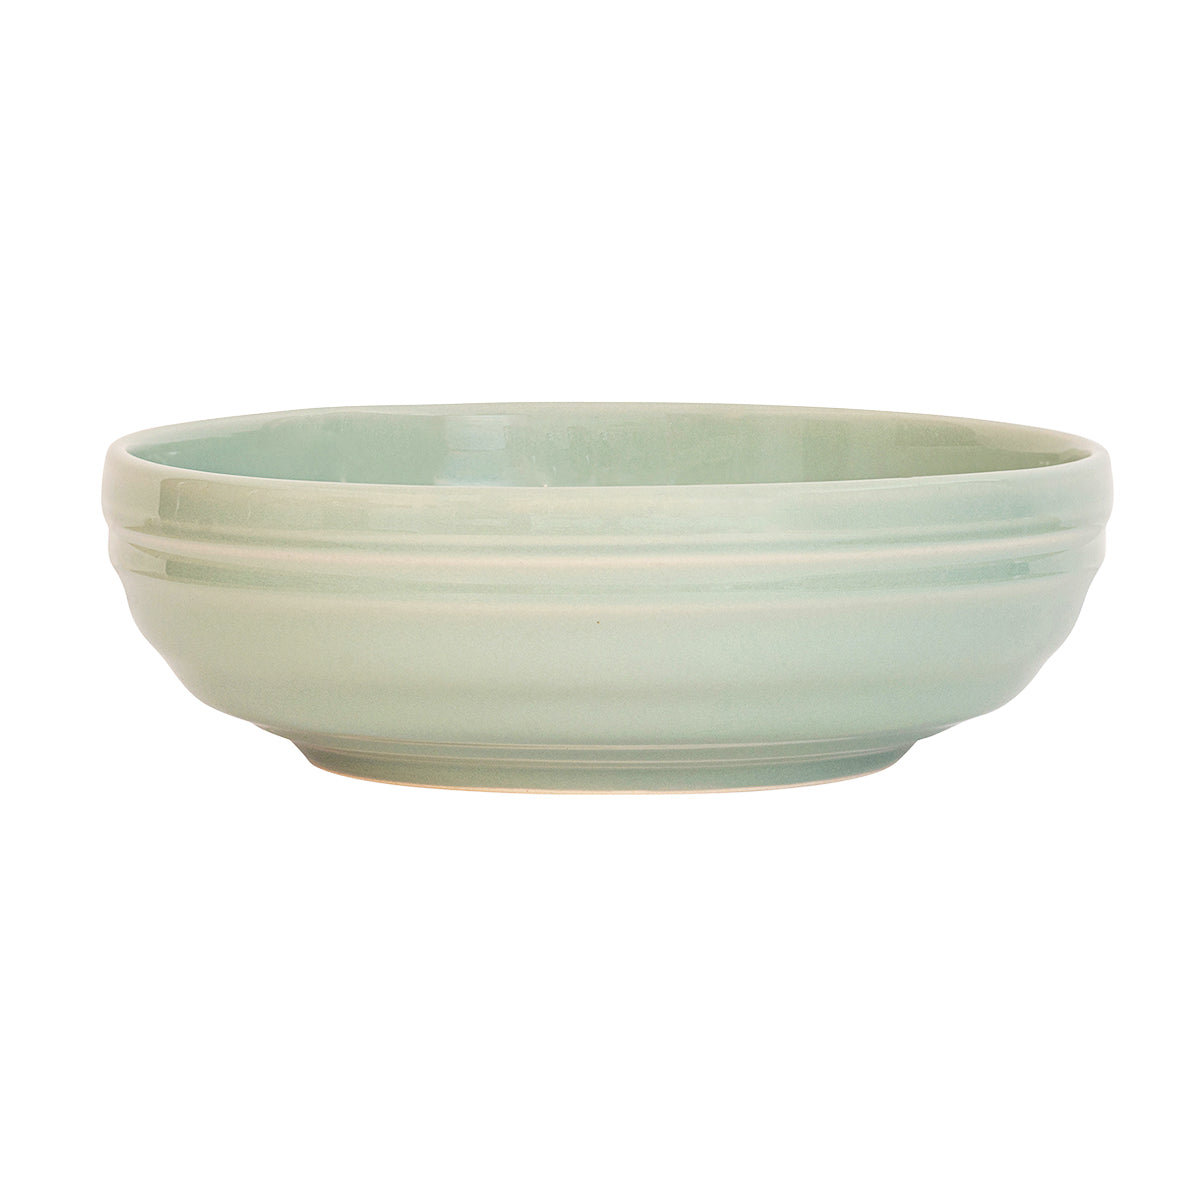 From our Bilbao Collection - A tour-de-force in modern tableware, this coupe bowl is translated beautifully in cozy curves, well-loved patina, and our fresh green hue. Serve up sumptuous amounts of your favorite grain bowl, fresh pasta, or seasonal salad.